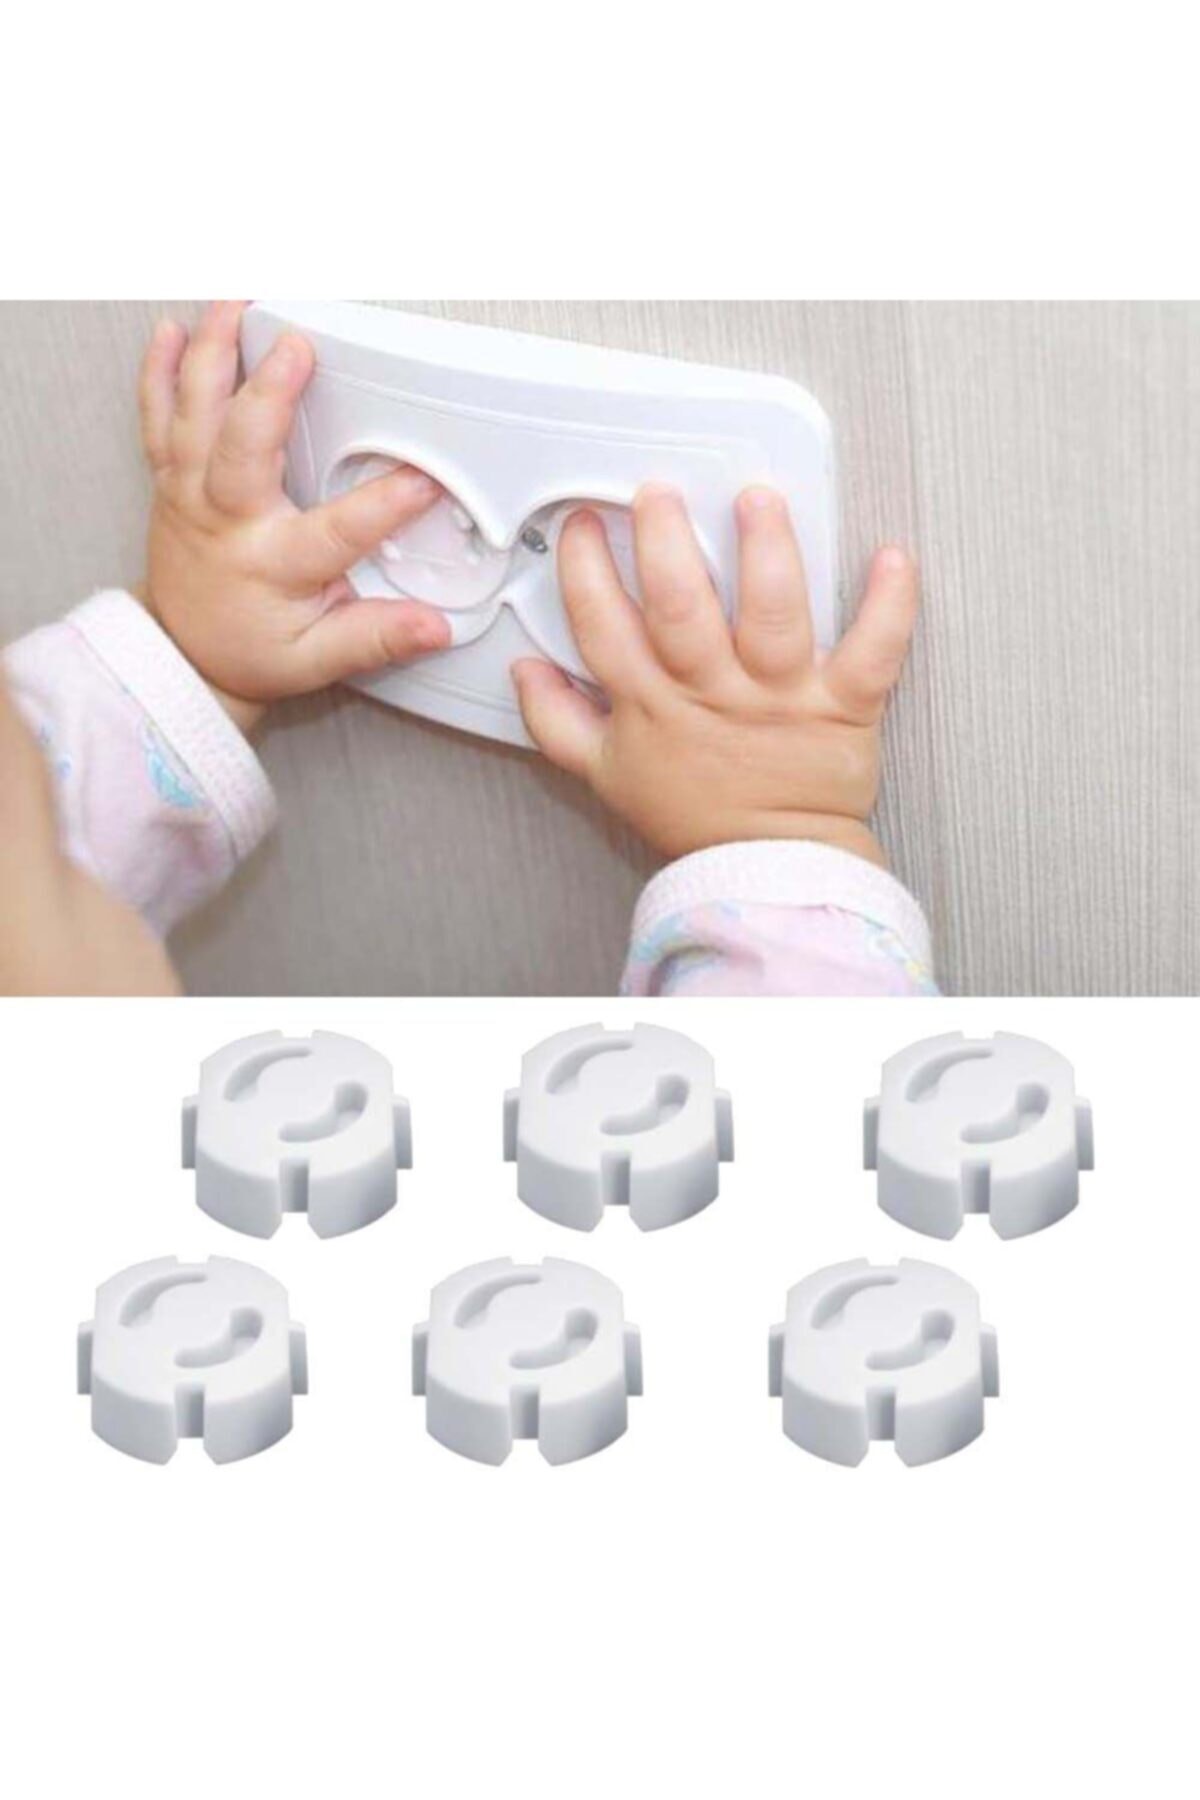 12pcs socket cap socket cap socket cap protection cap mother baby and child safety first-class quality product